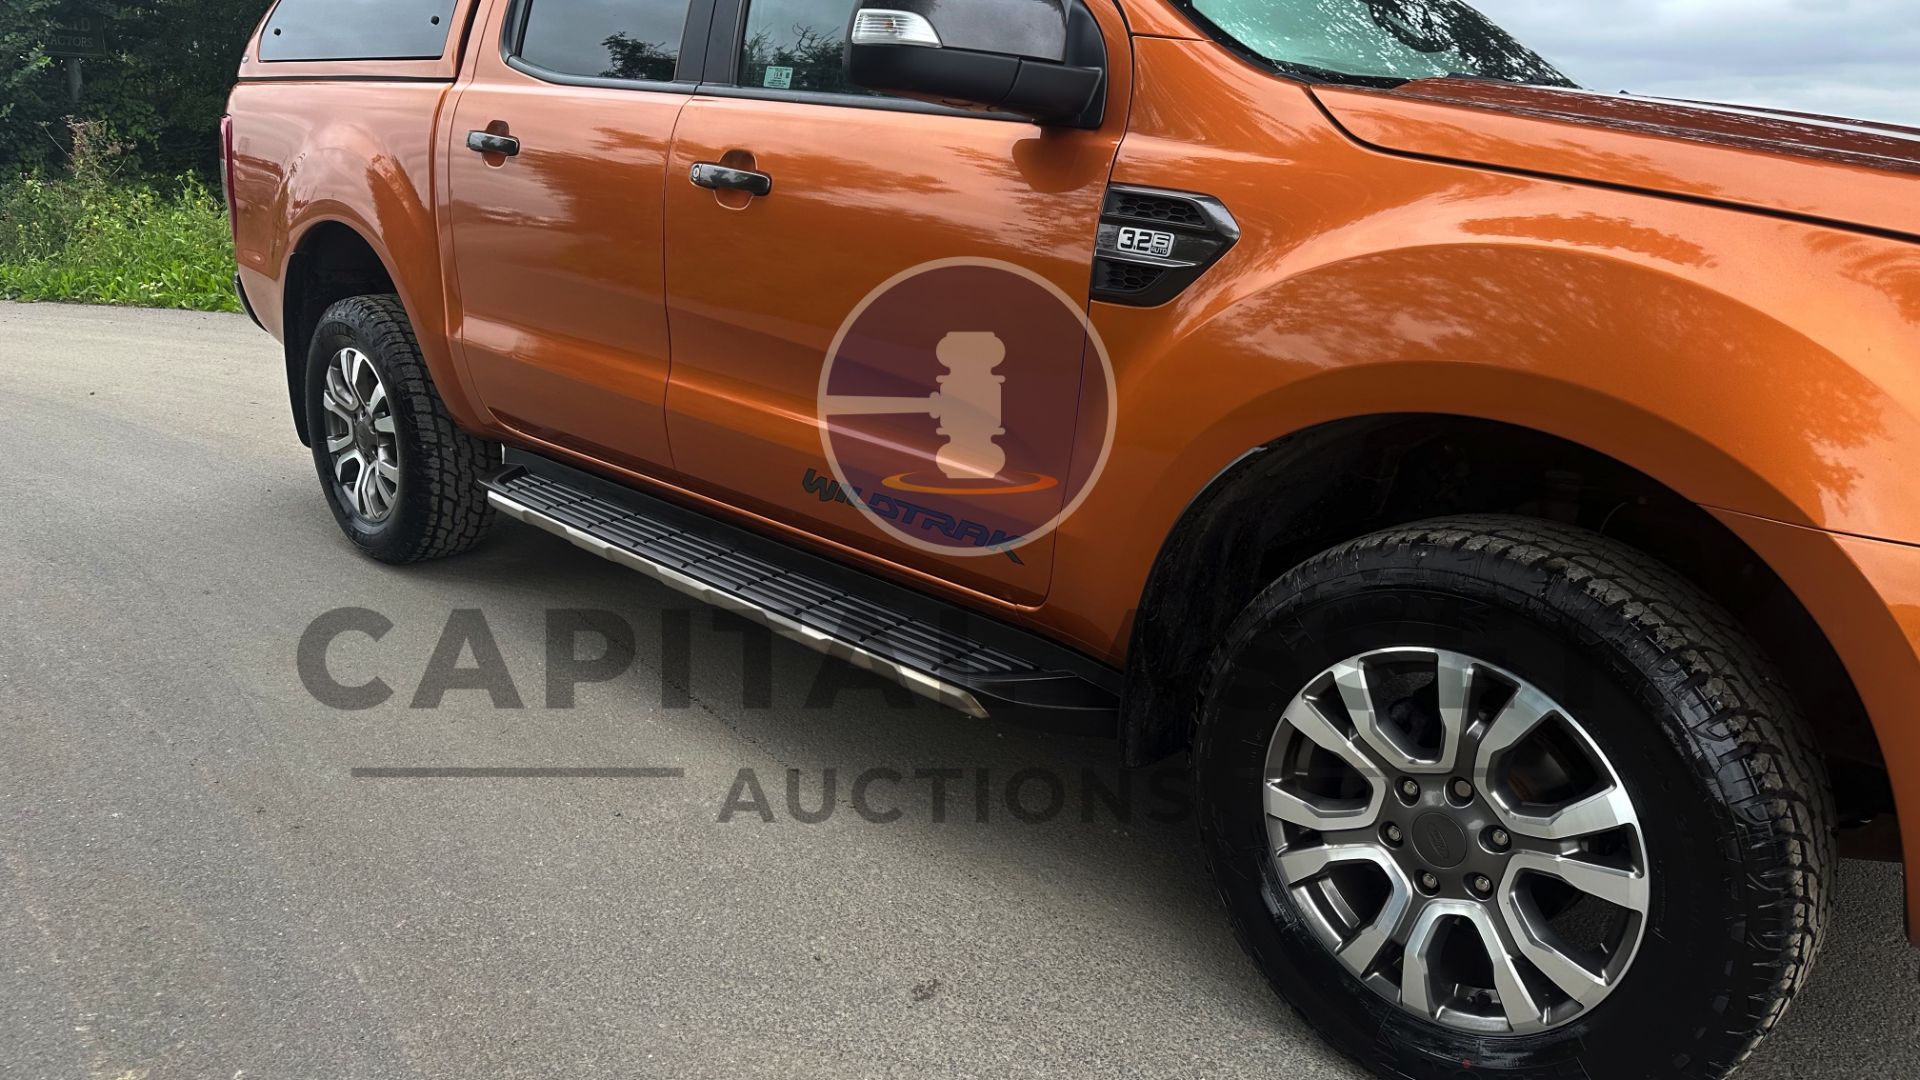 (ON SALE) FORD RANGER *WILDTRAK EDITION* DOUBLE CAB PICK-UP (2019 - EURO 6) 3.2 TDCI - AUTOMATIC - Image 15 of 53